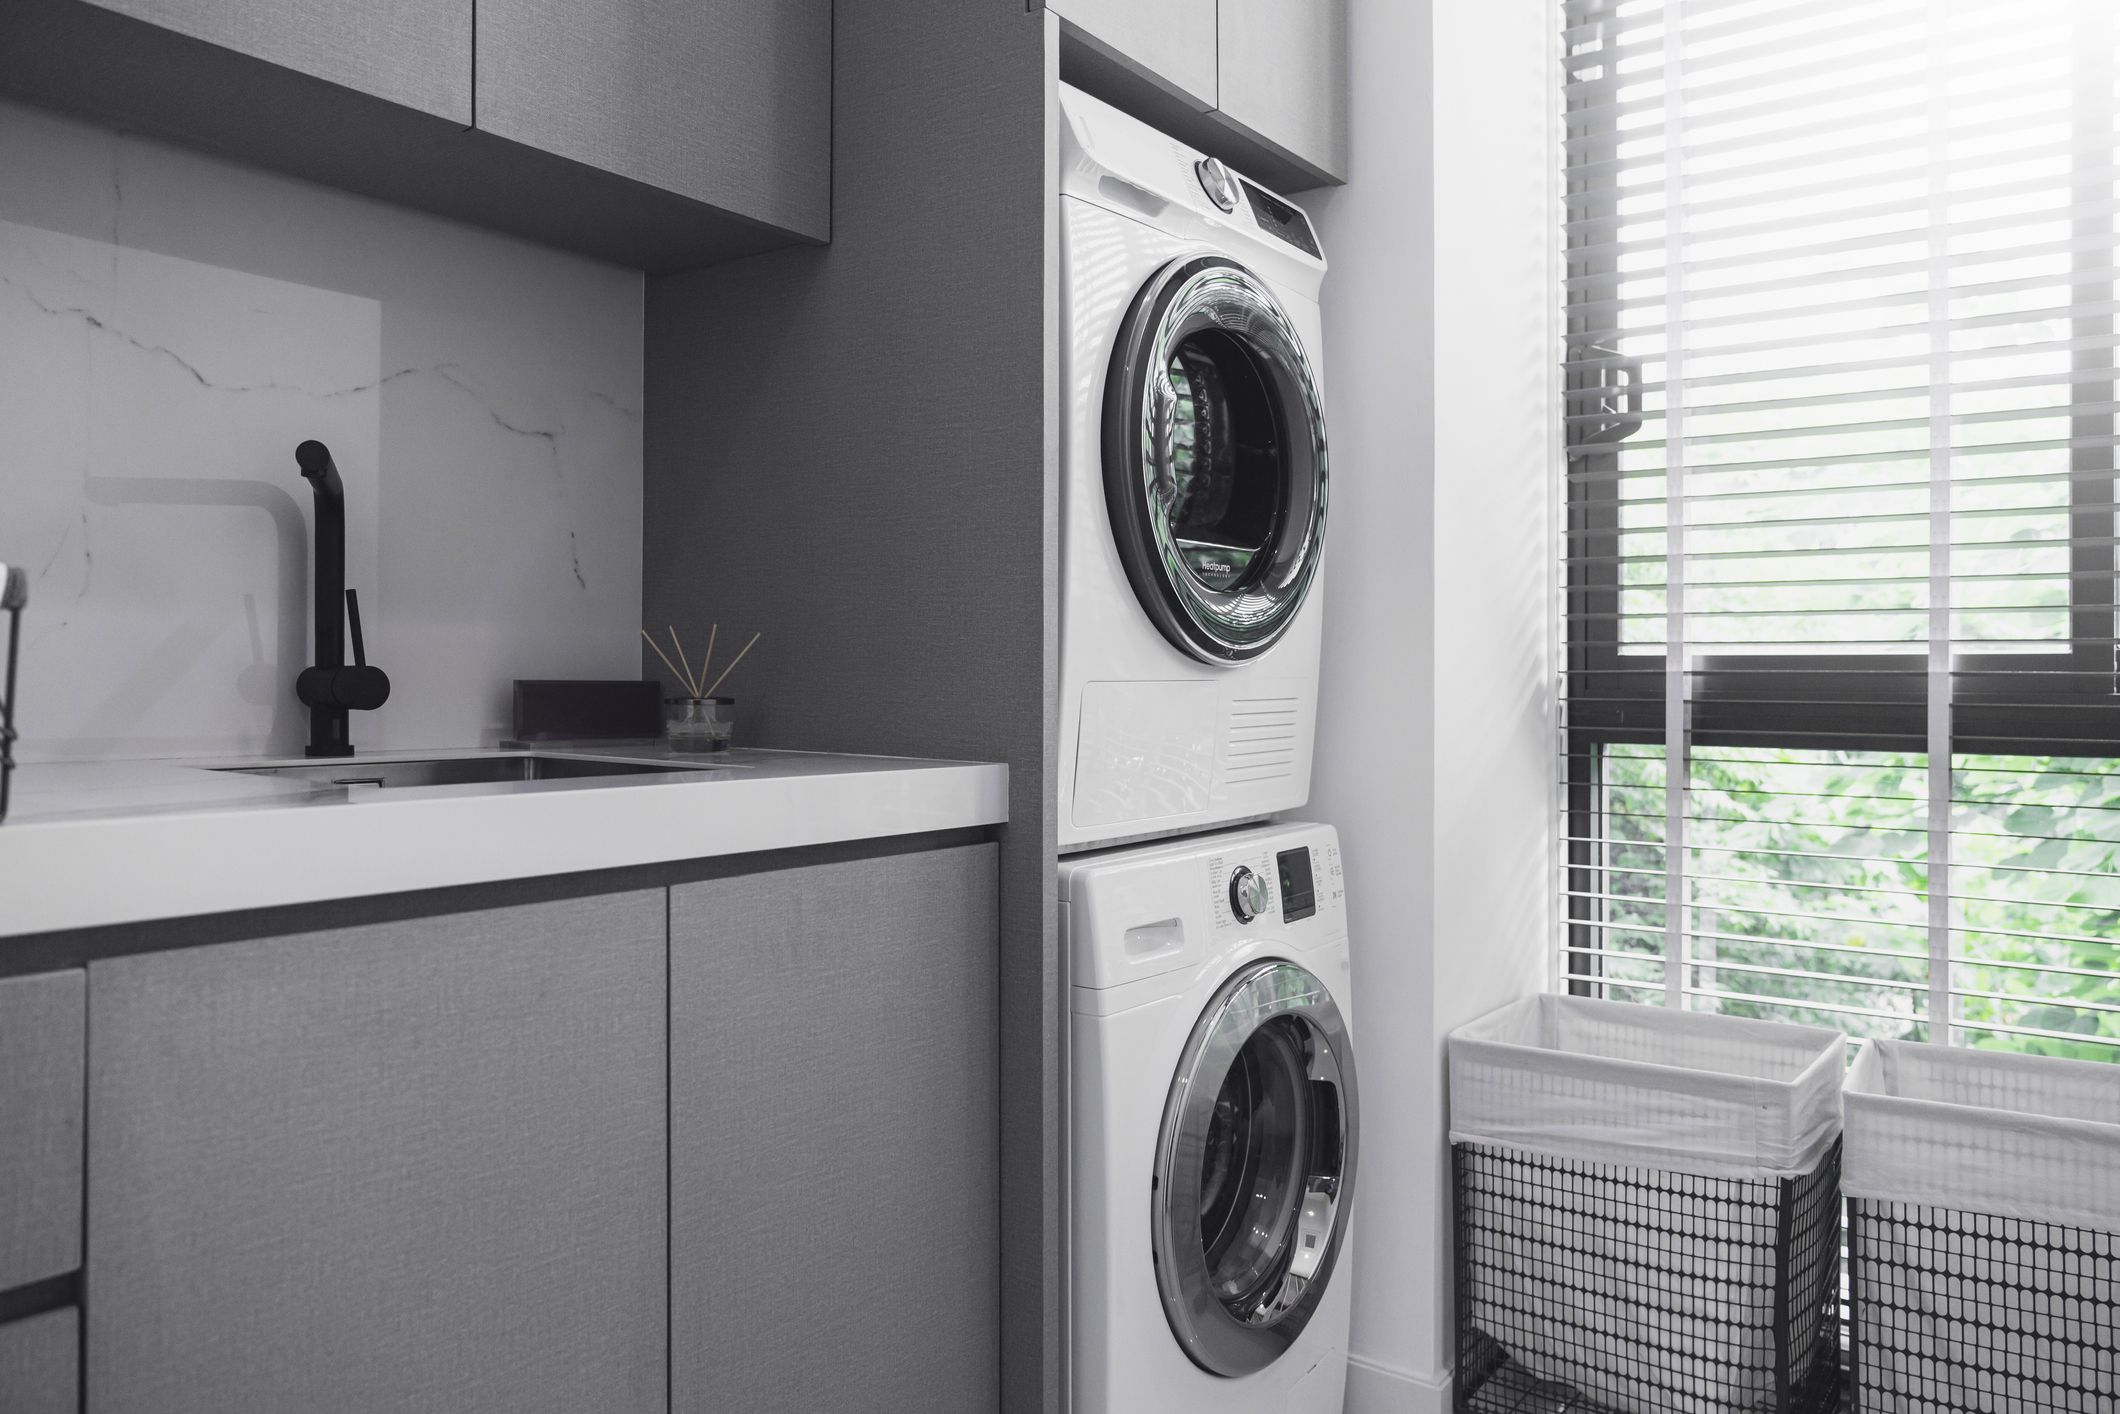 Are You In Need Of Home Appliance Repair?